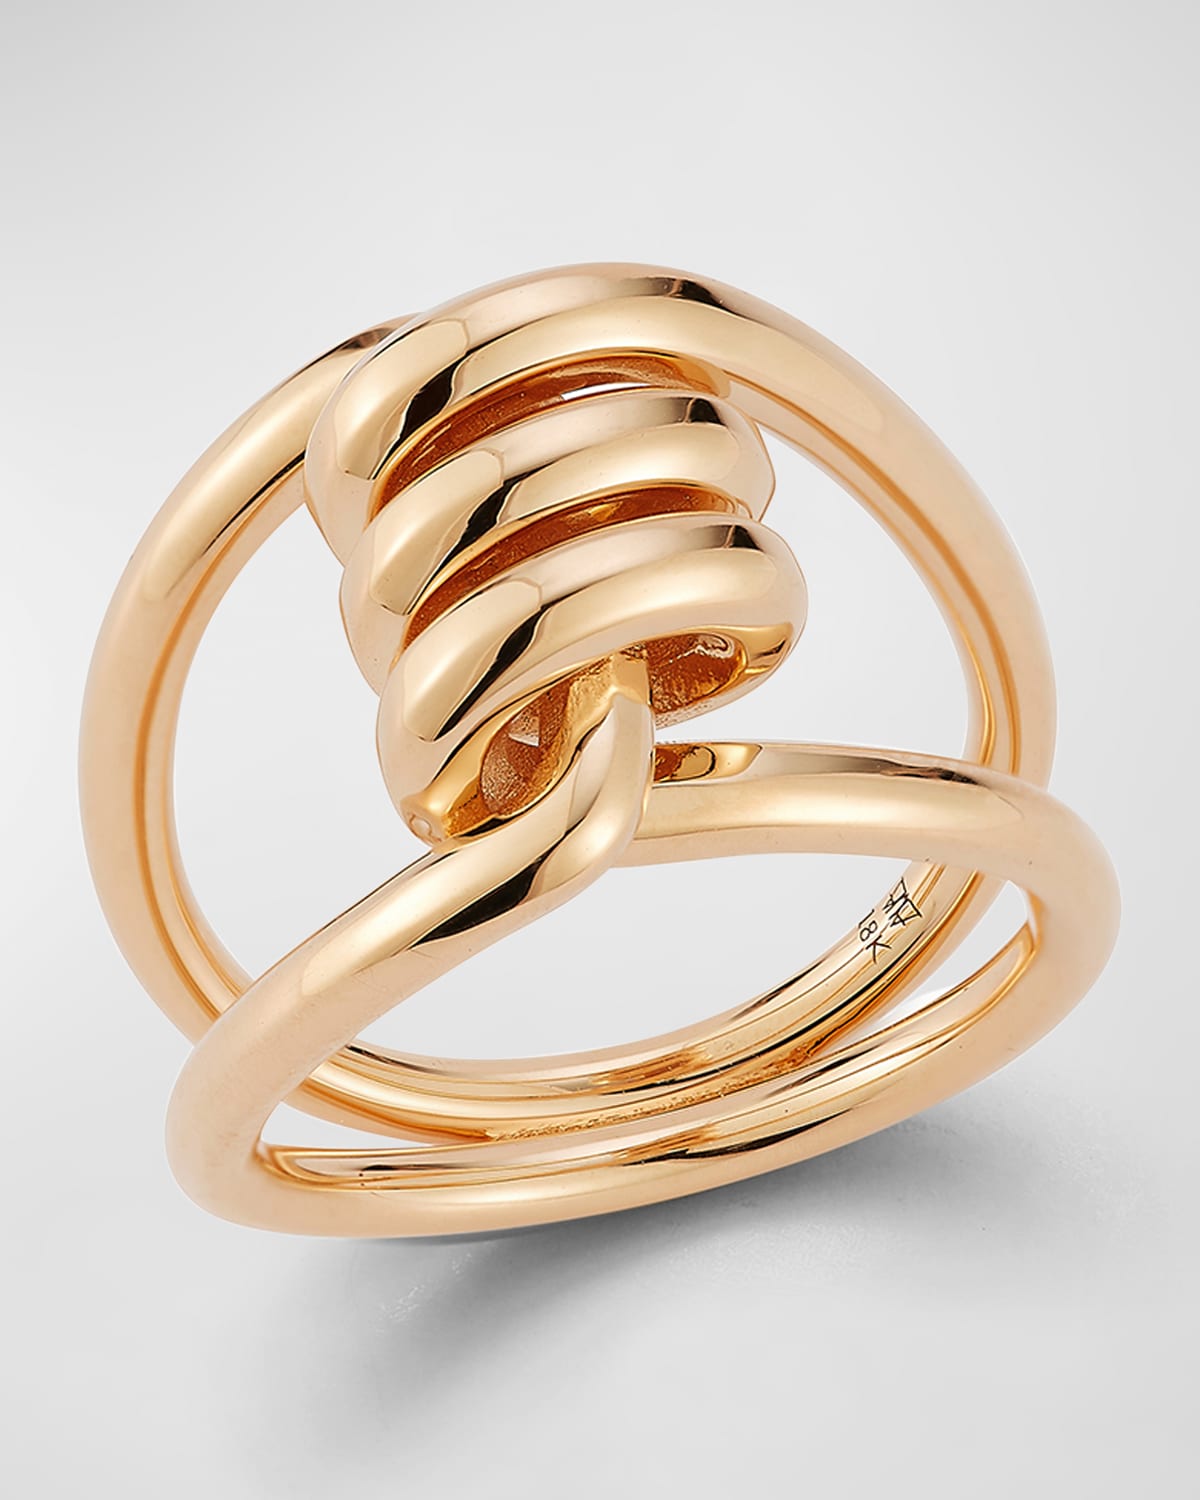 Huxley 18k Rose Gold Single Coil Link Ring, Size 7